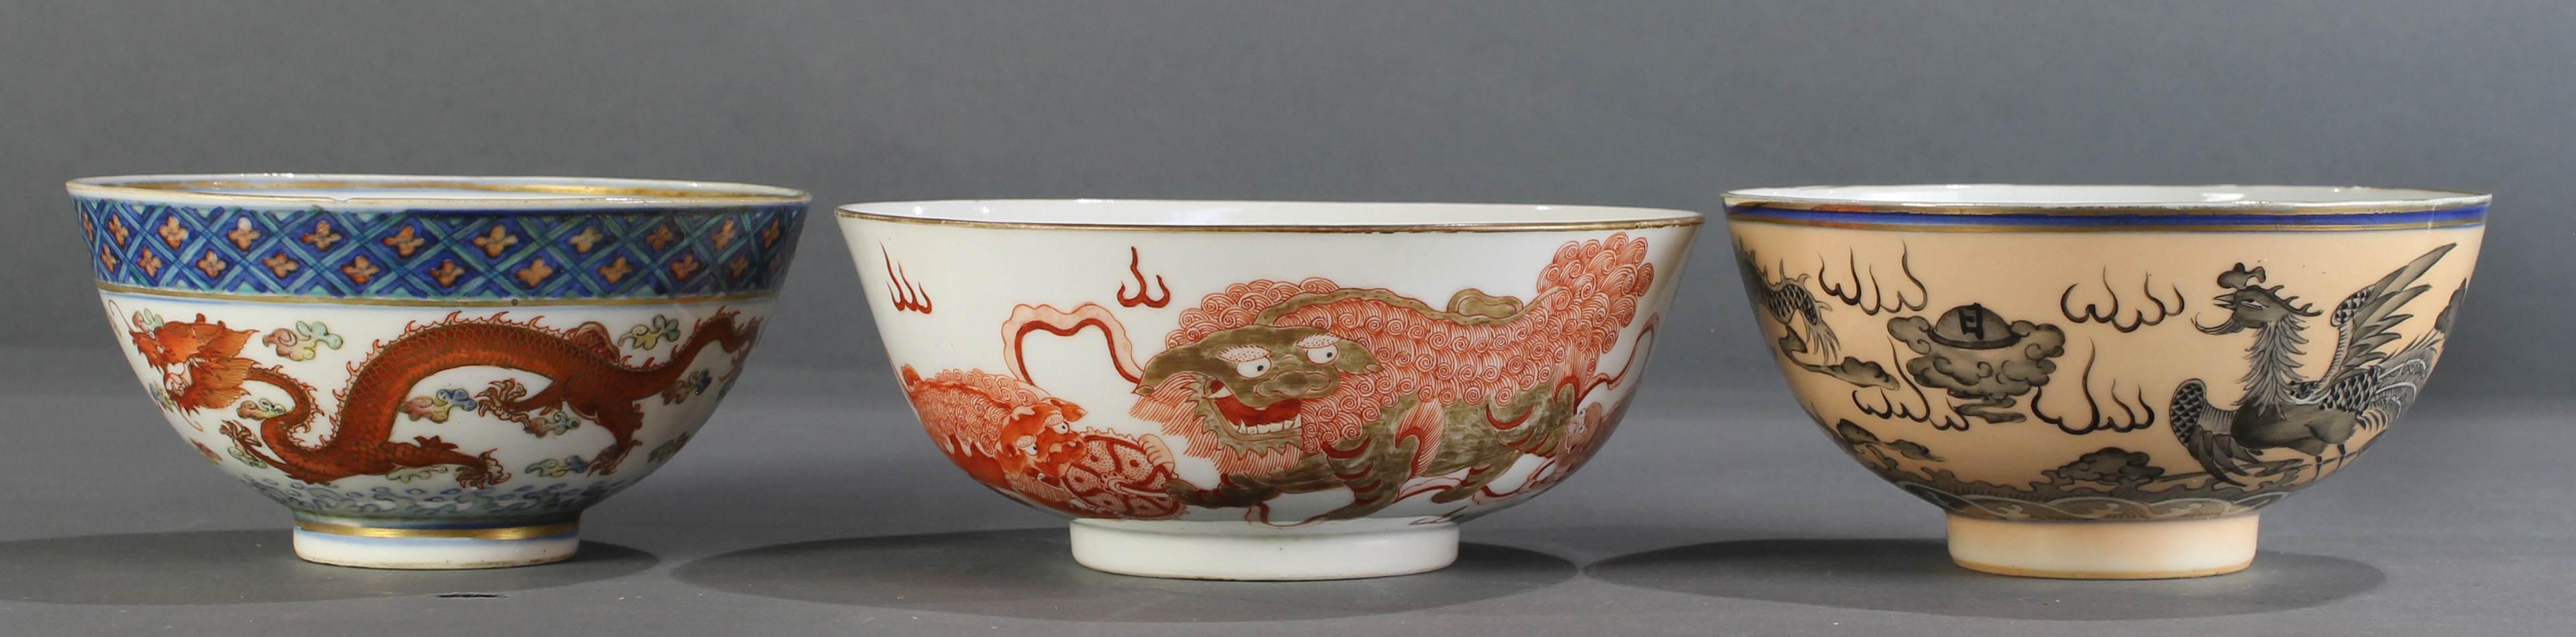 (Lot of 7) A Group of Famille Rose 'Dragon and Phoenix' and 'Lion' Bowls - Image 4 of 4